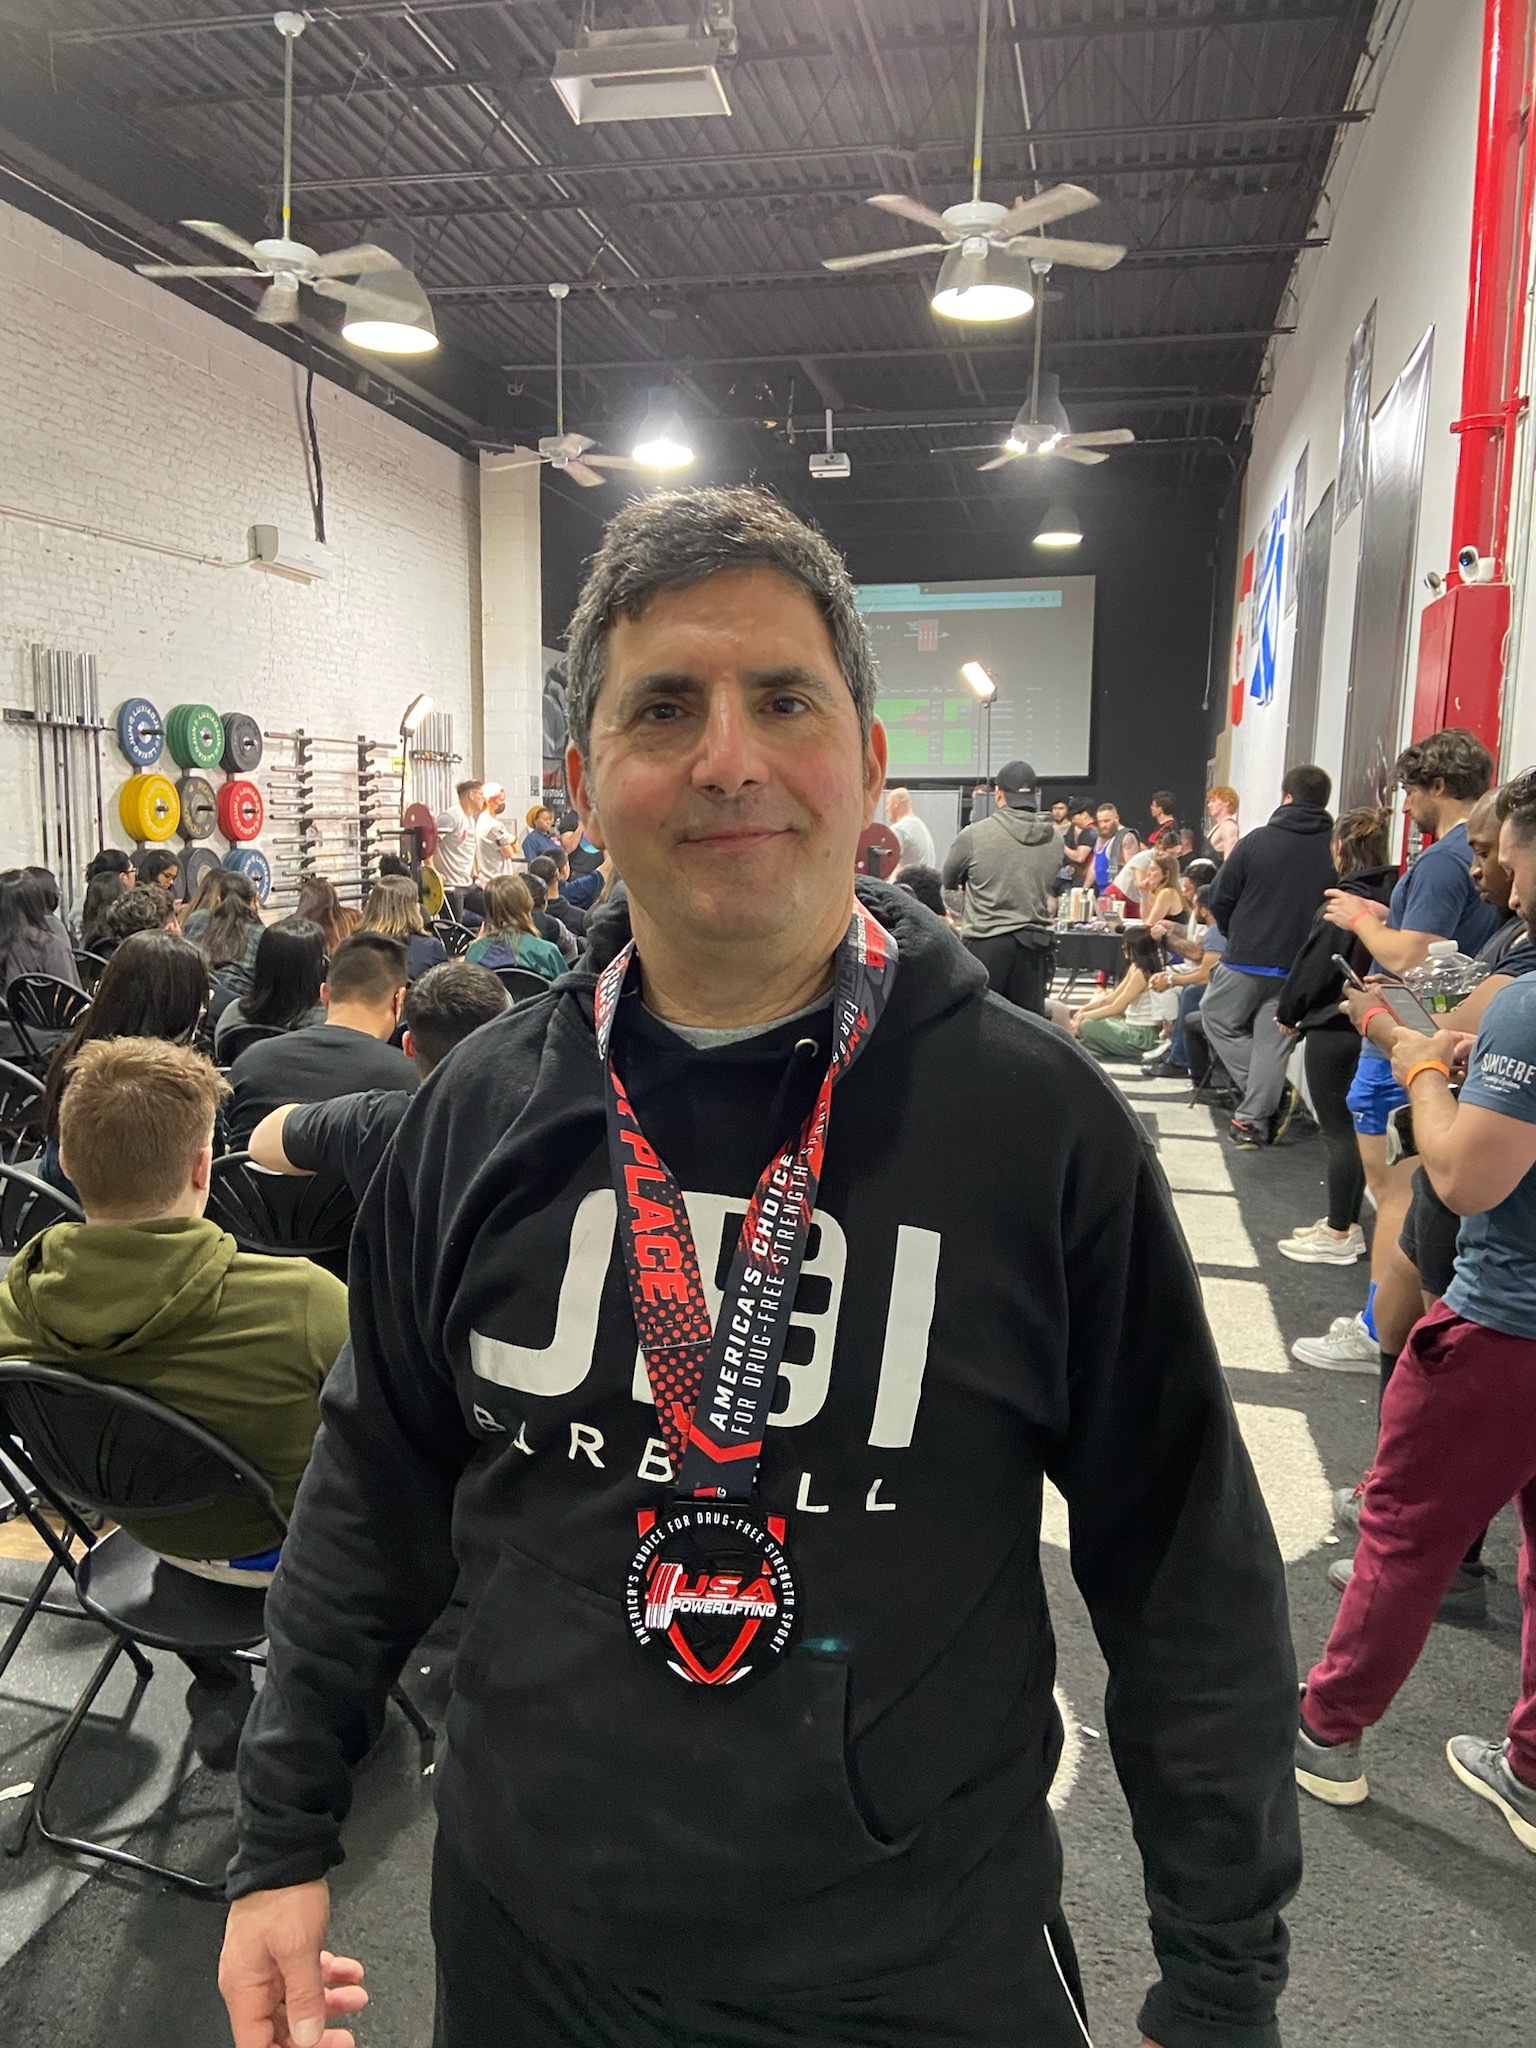 Mike Mayo after winning his first place medal at a competition on April 30.